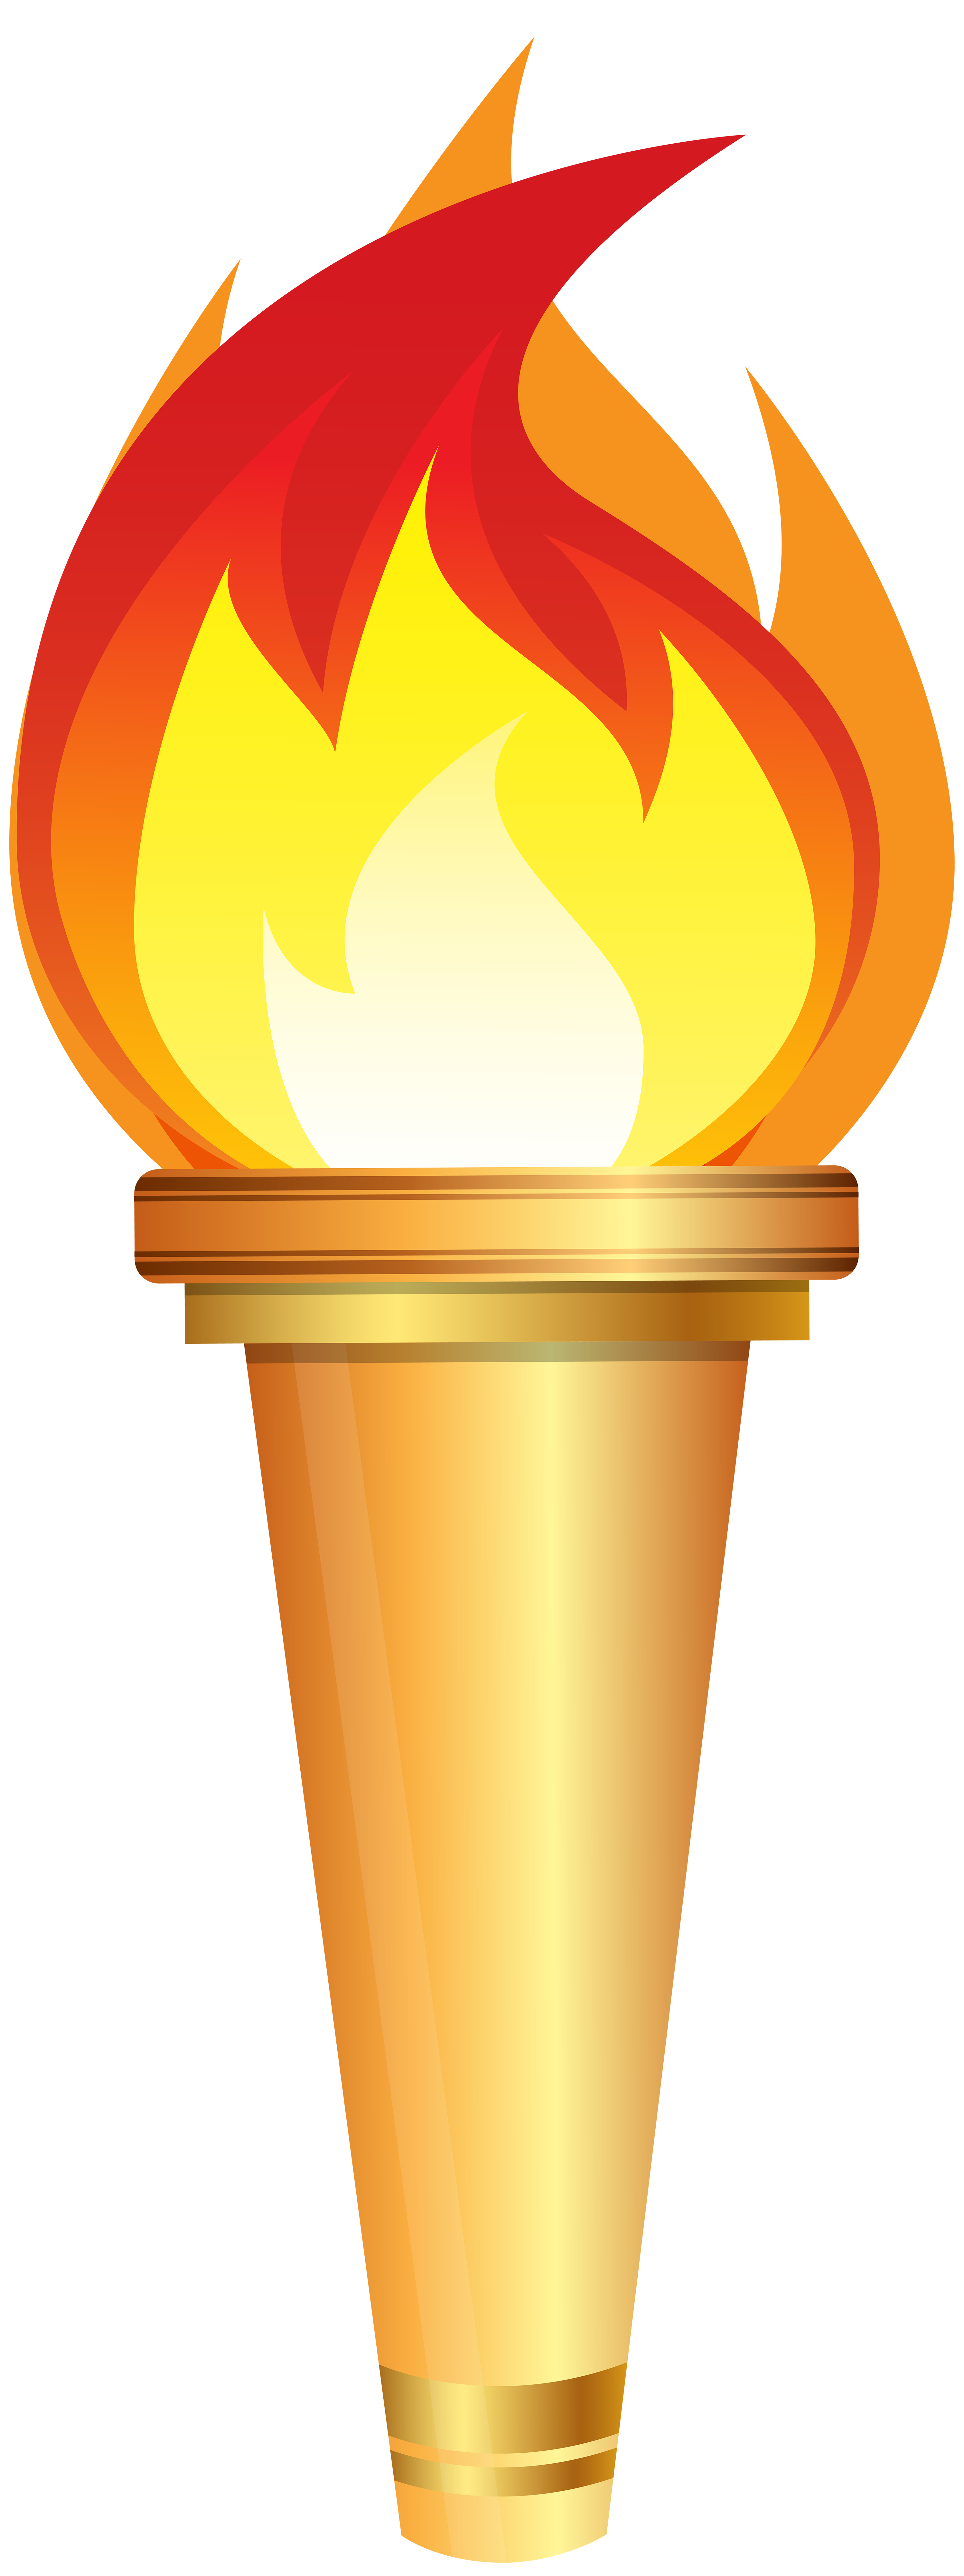 Torch clipart #4, Download drawings